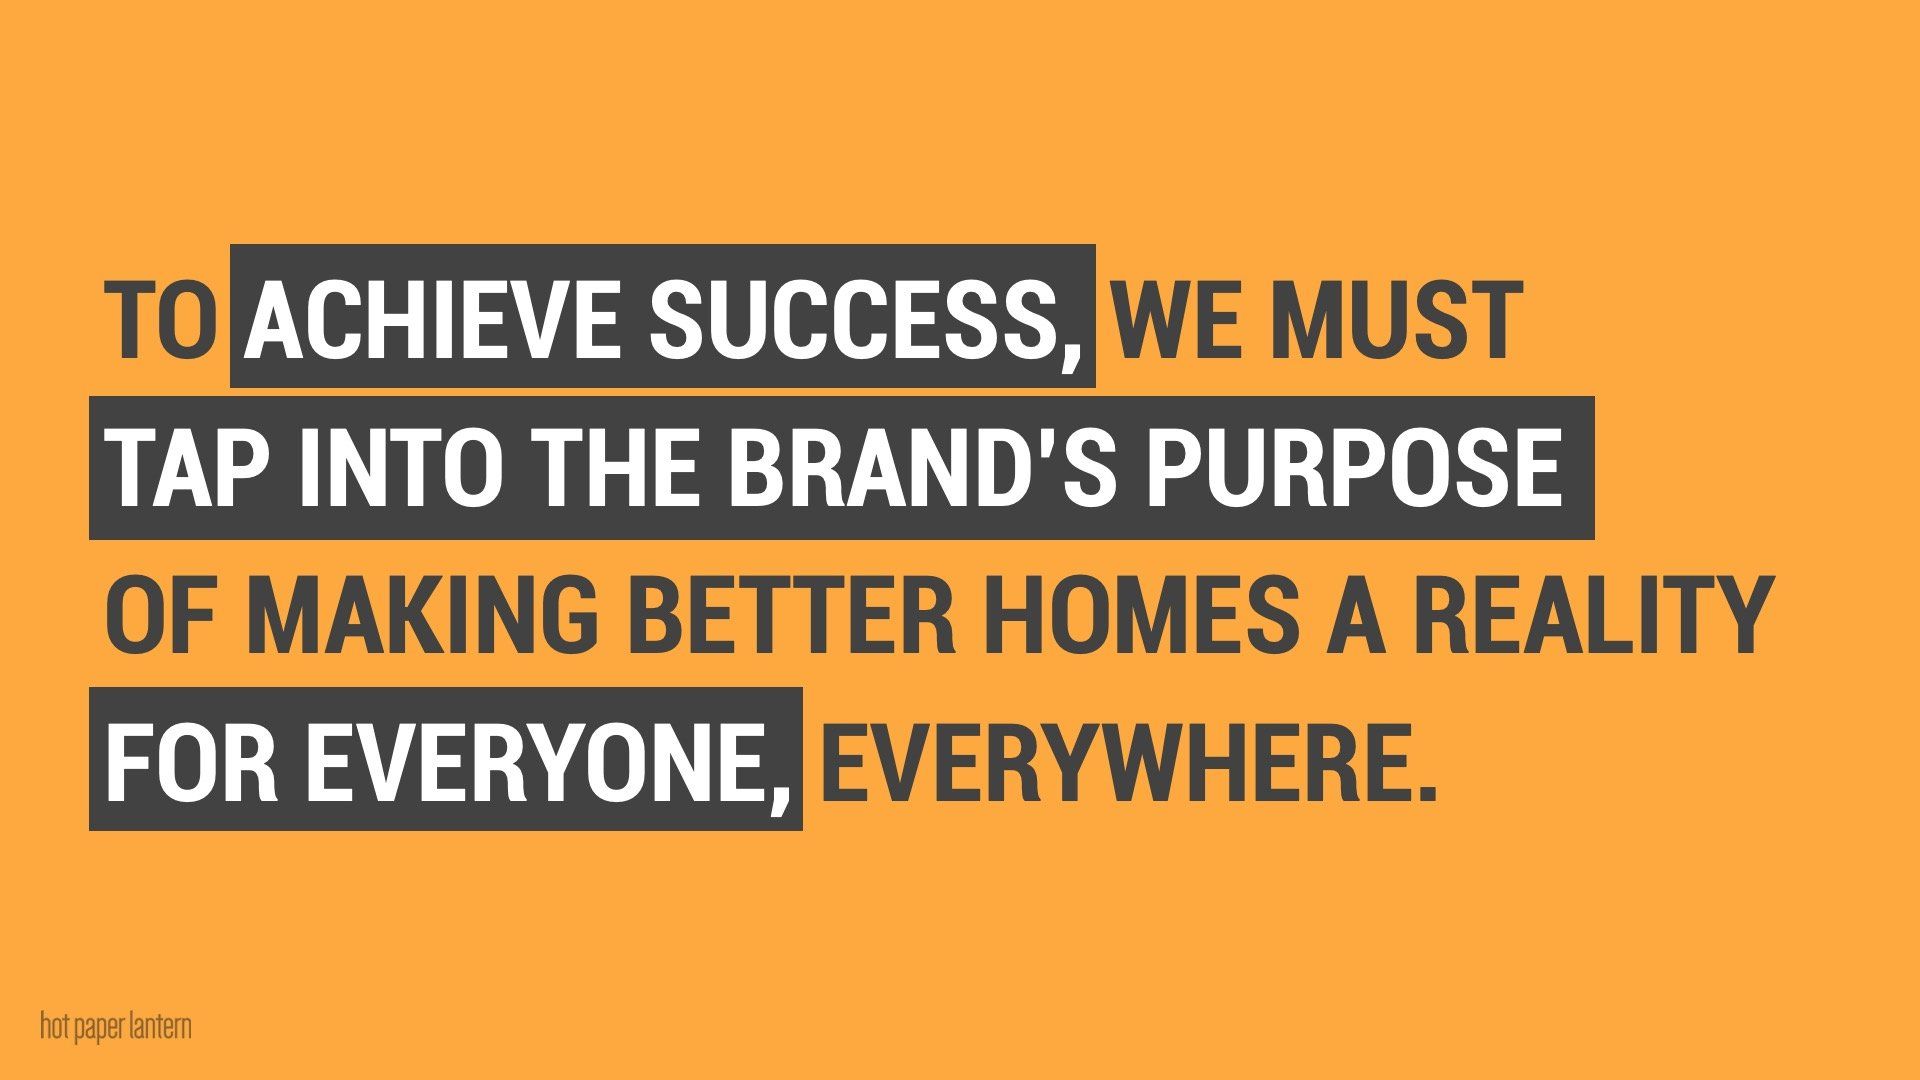 to achieve success , we must tap into the brand 's purpose of making better homes a reality for everyone everywhere .